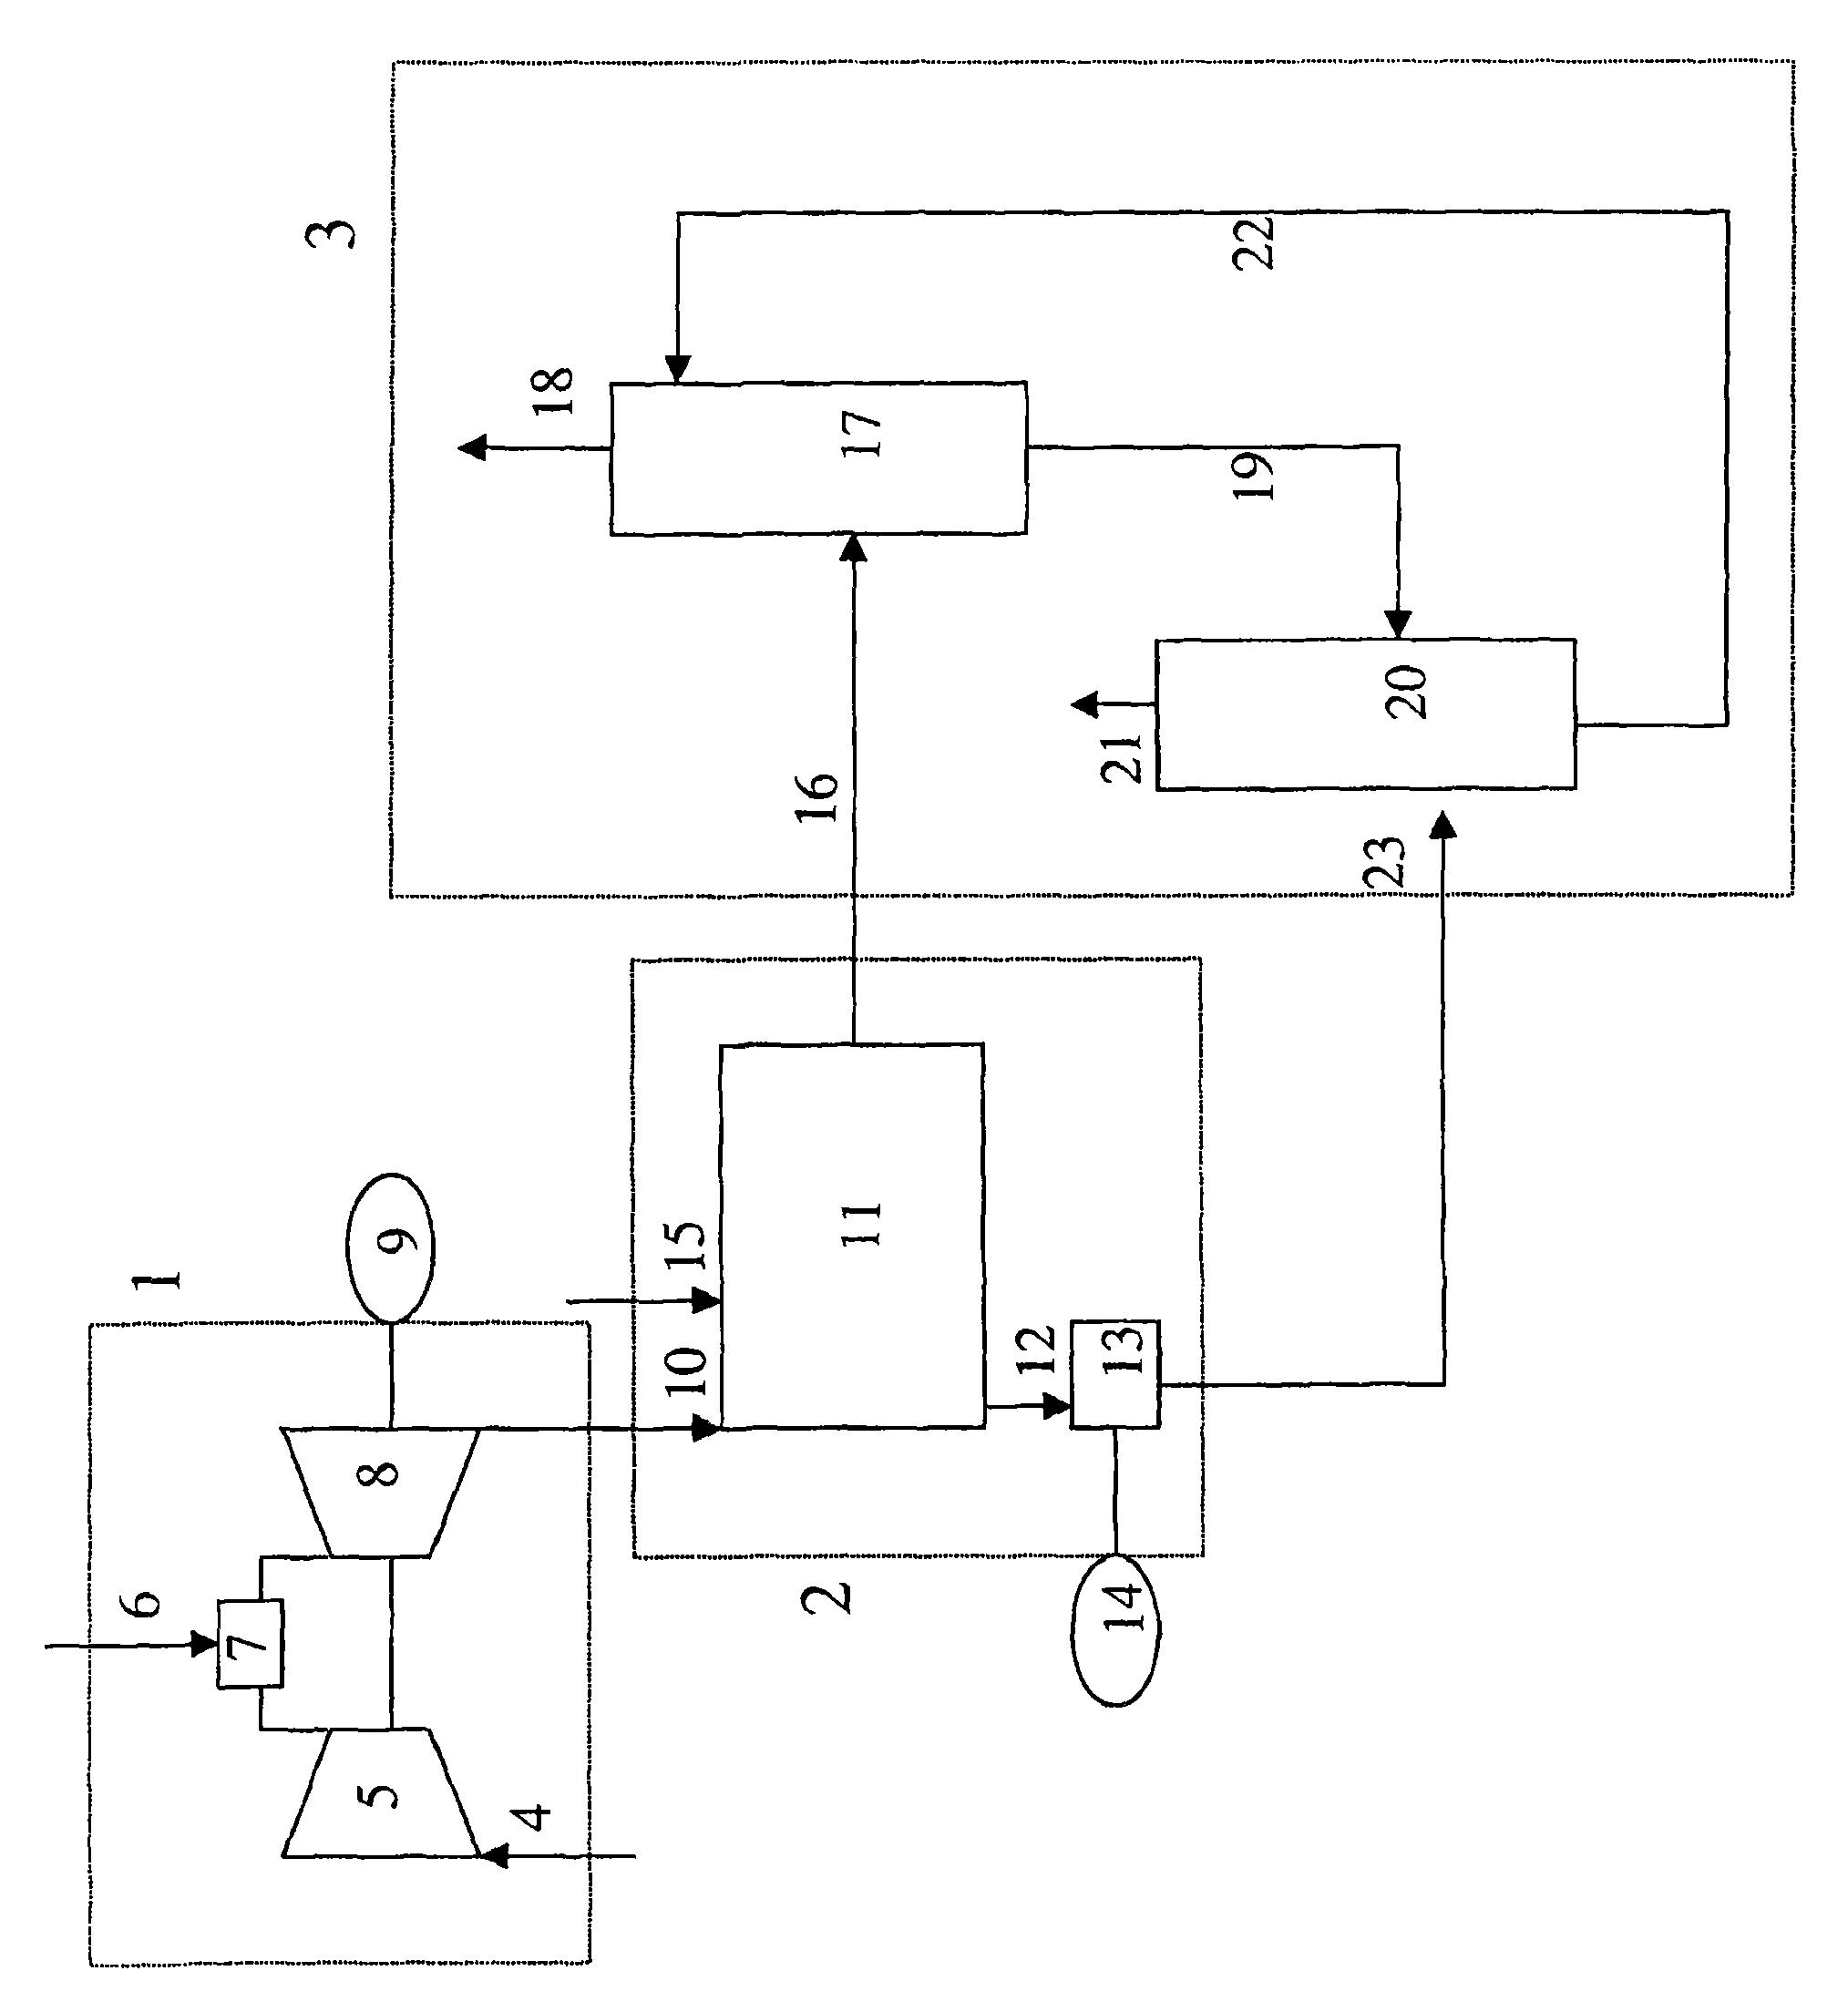 Process for reducing carbon dioxide emission in a power plant